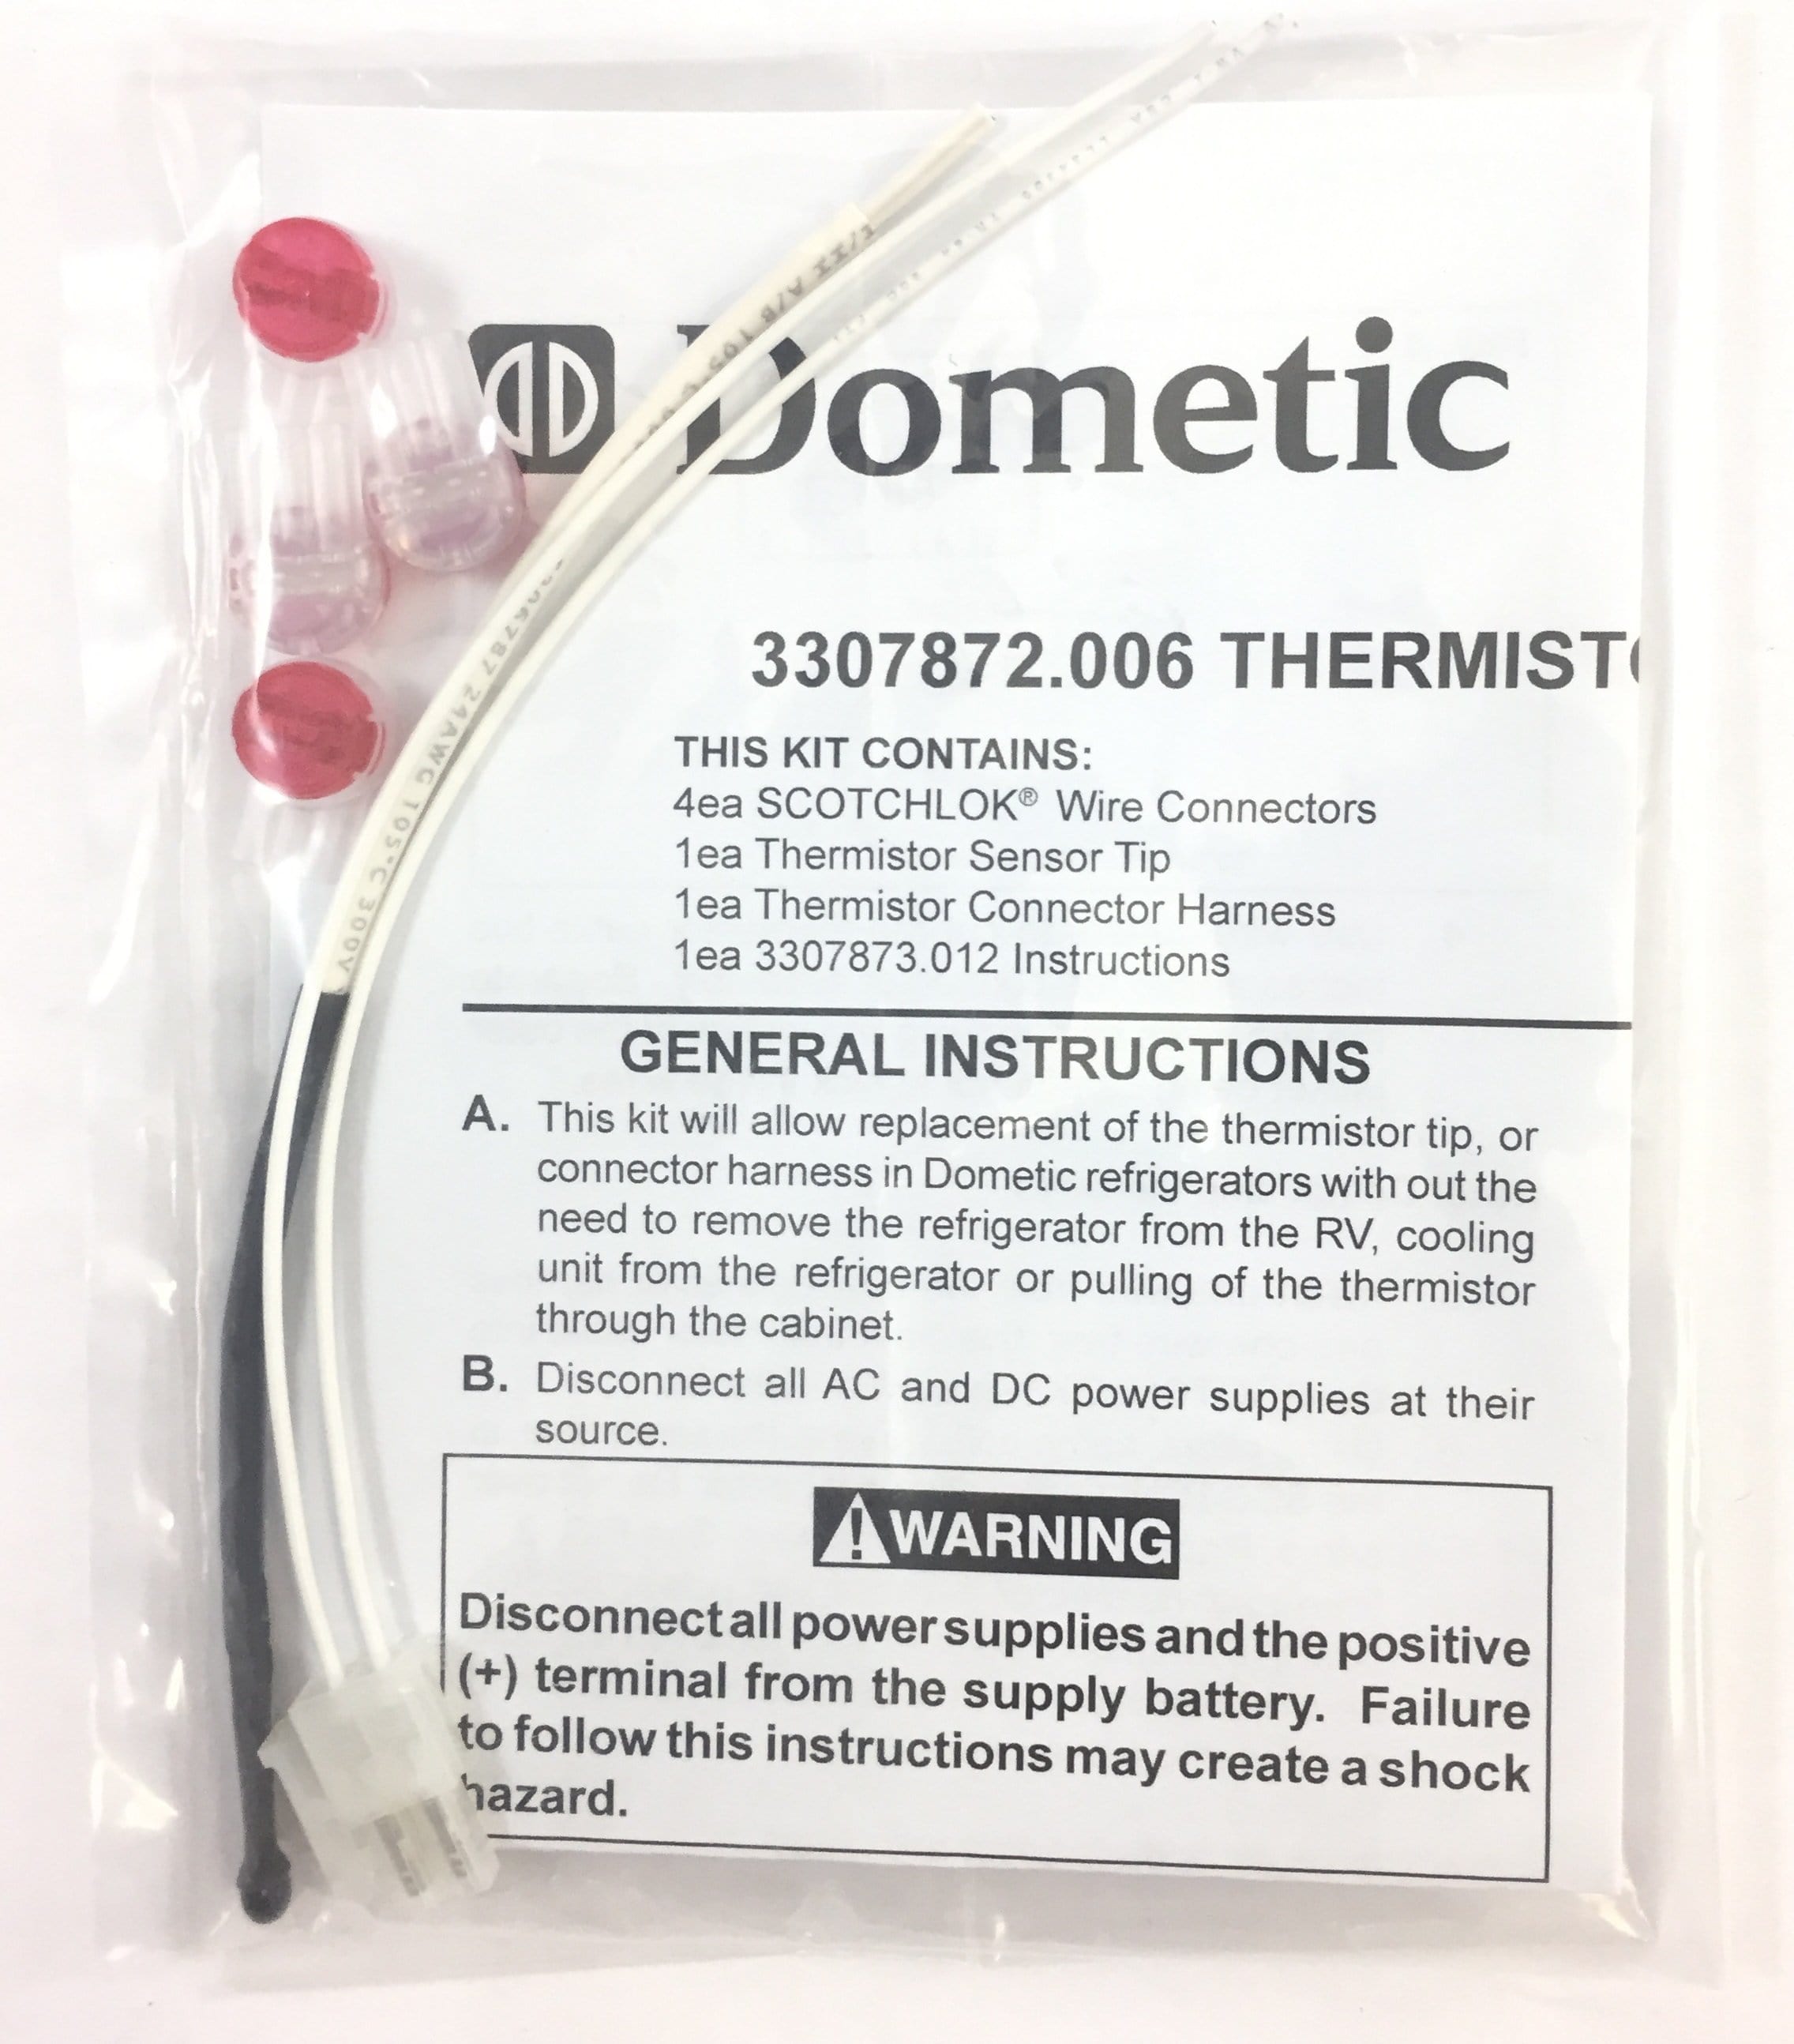 Dometic 3307872.006 Thermistor Replacement Kit